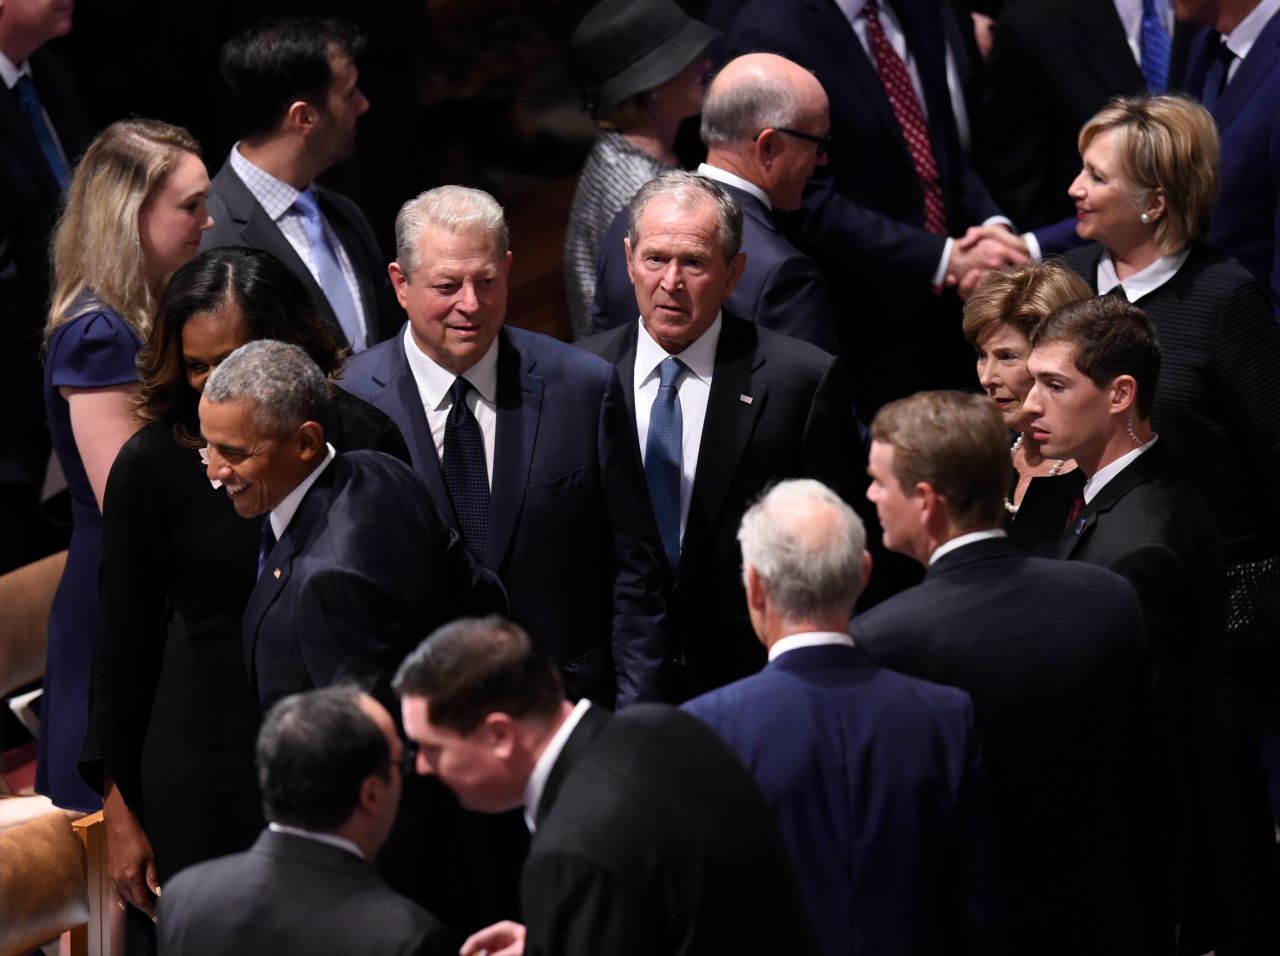 From left, former President Barack Obama, former first lady Michelle Obama, former Vice President Al Gore, former President George W. Bush, former first lady Laura Bush and former Secretary of State Hillary Clinton arrive for Saturday's memorial service.